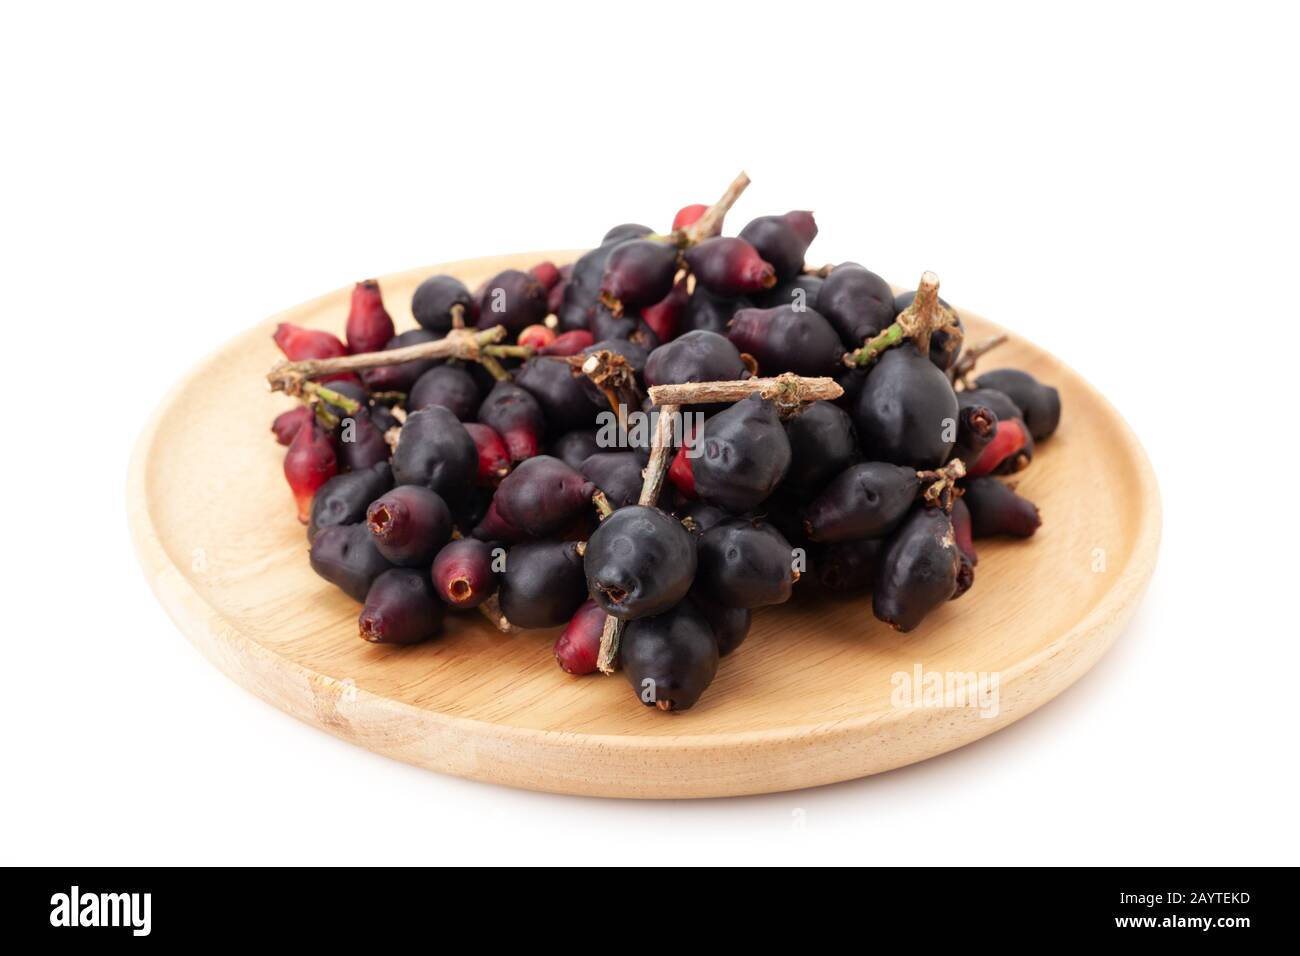 Syzygium cumini, black plum, jamun or Syzygium cumini in wooden plate isolated on white background with clipping path Stock Photo